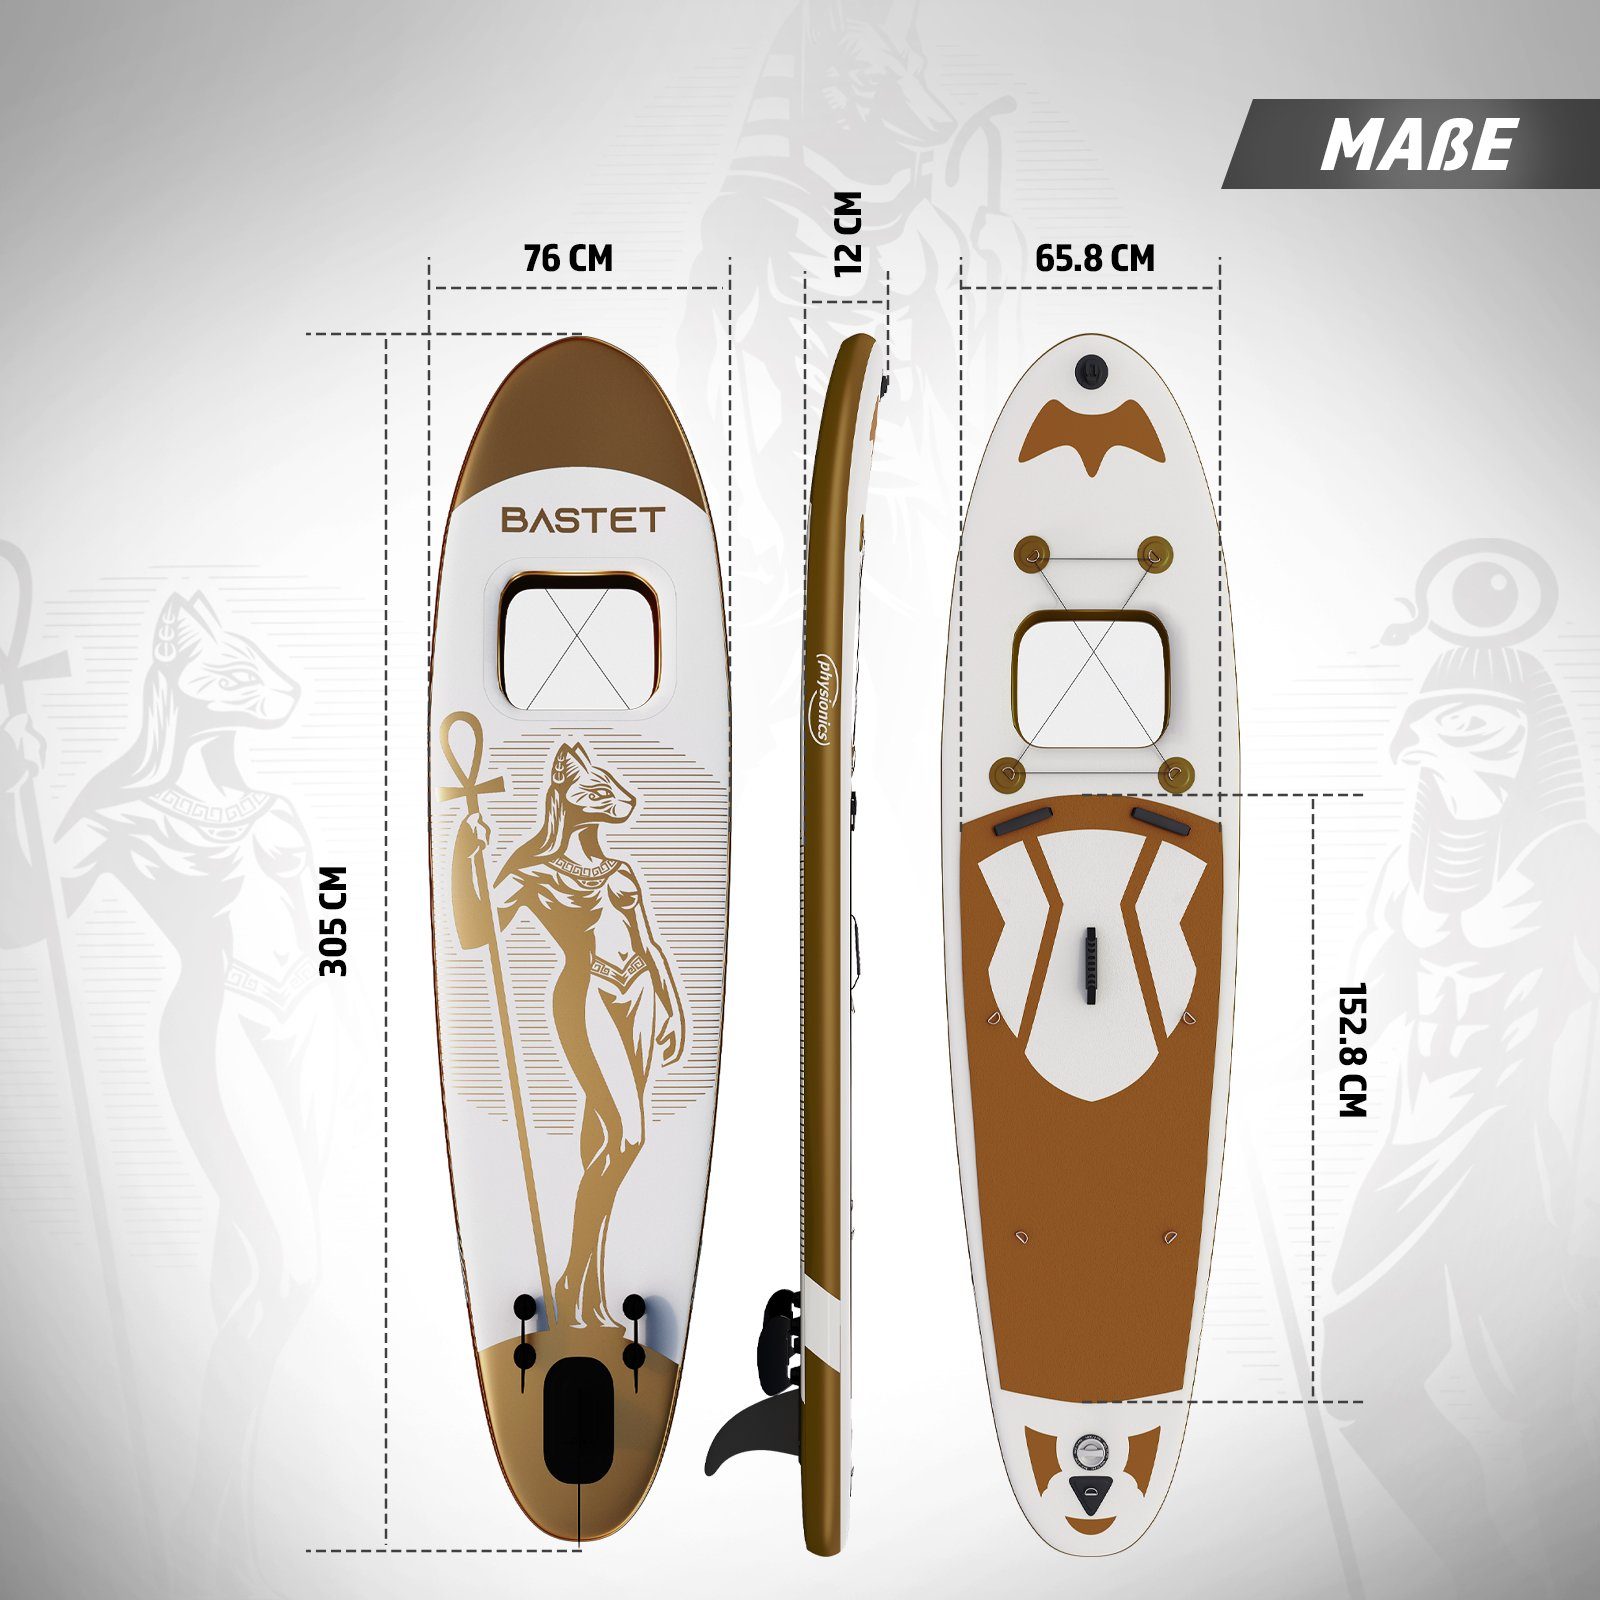 Paddle Board Board Physionics Stand Bastet(Gold) Up SUP 305cm Aufblasbares SUP-Board